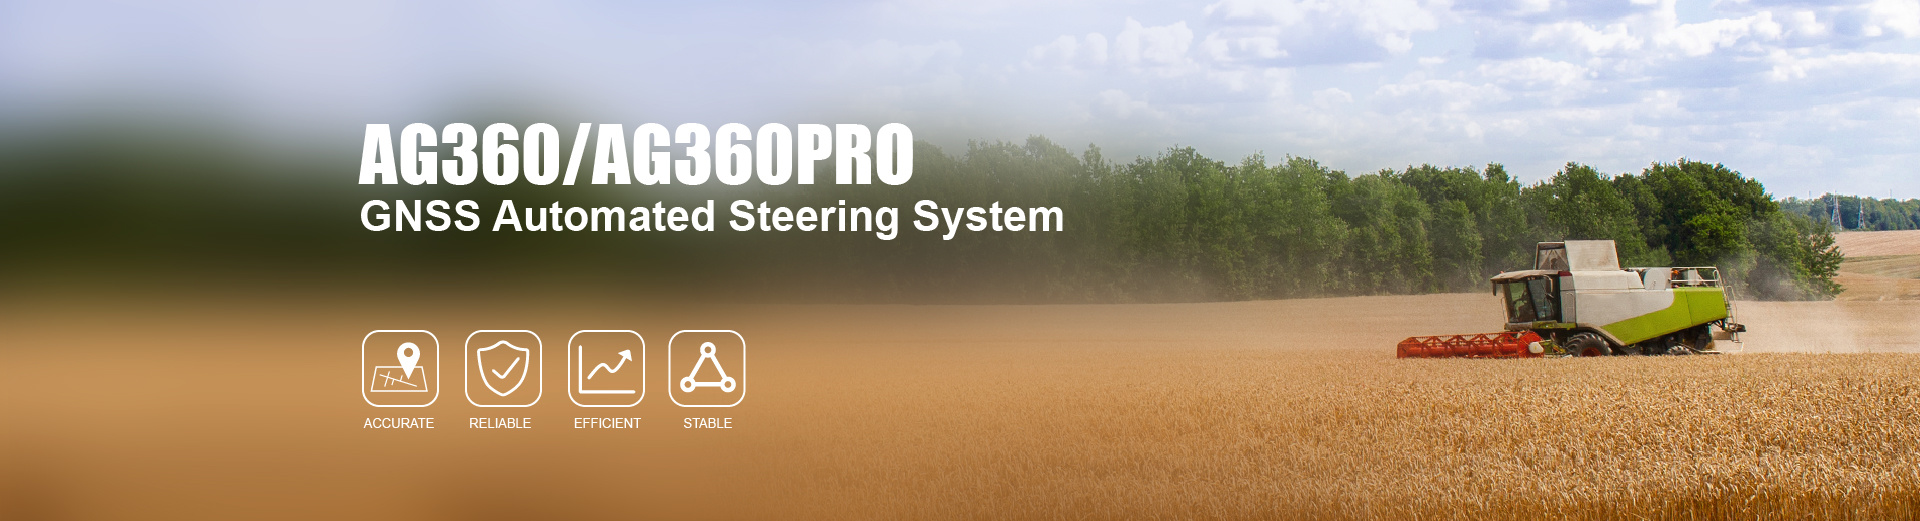 AG360 Pro Automated Steering System